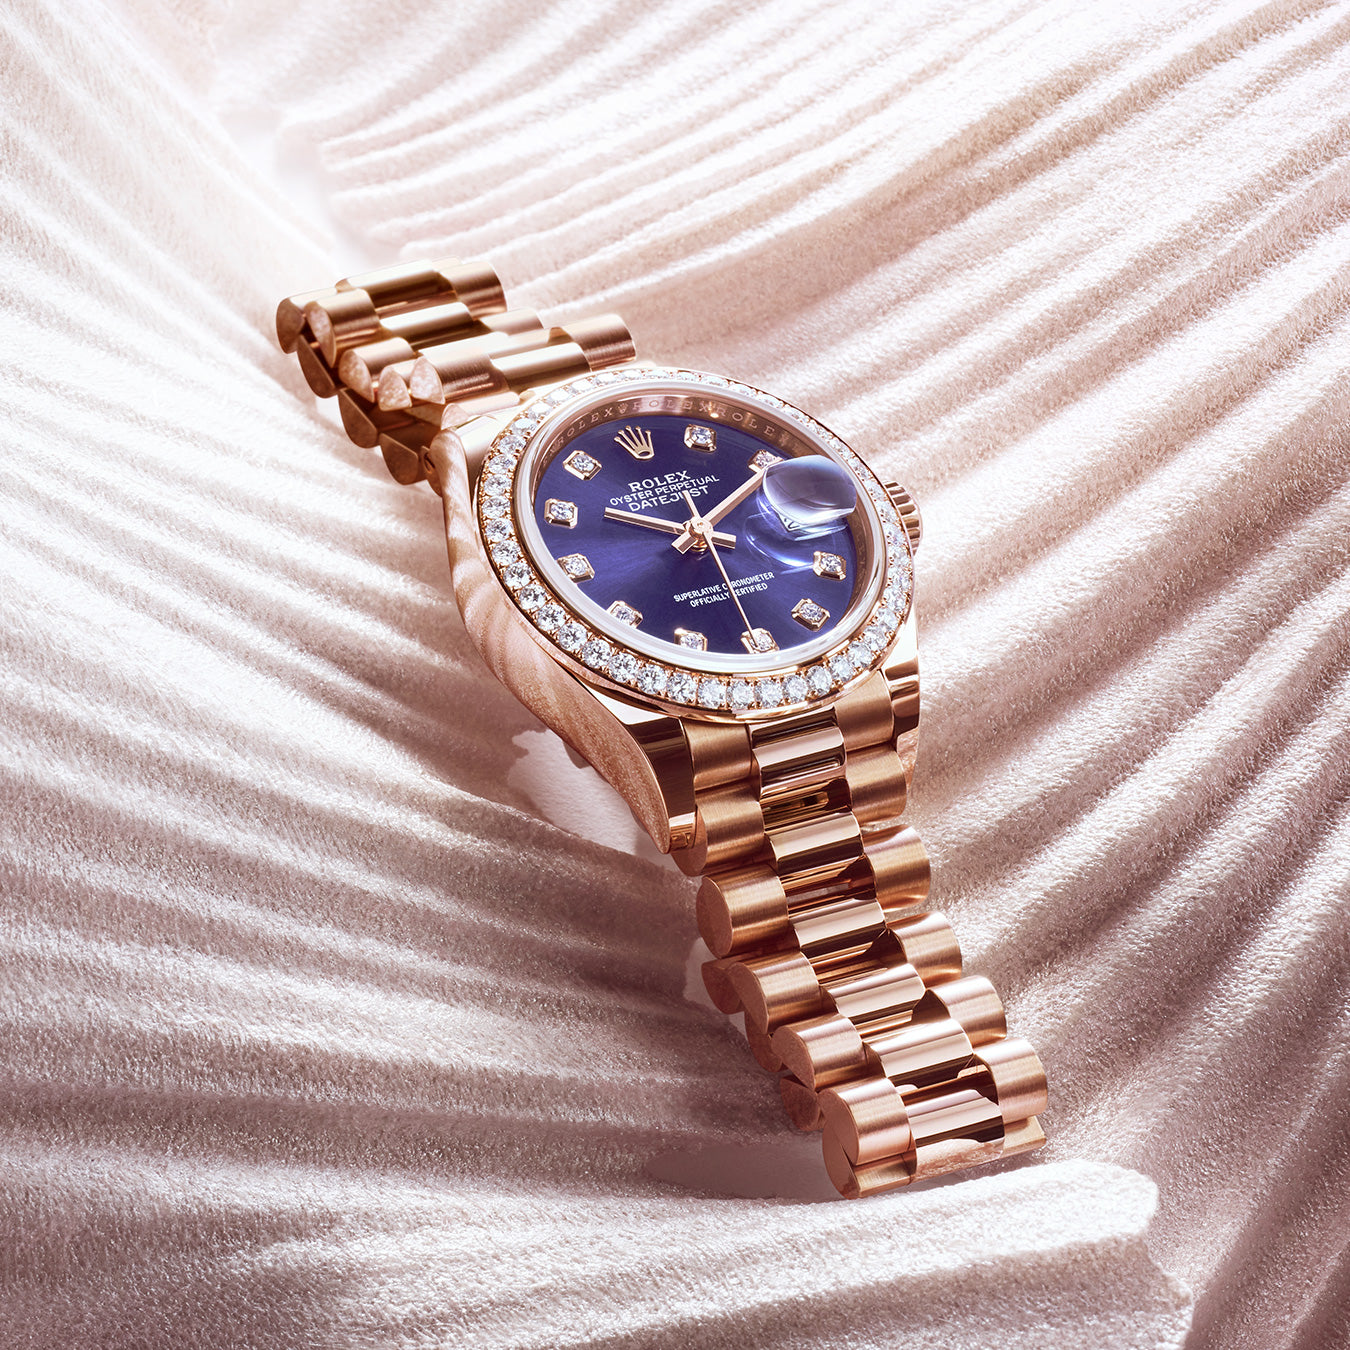 Rolex Lady-Datejust in Everose Gold and Diamonds at Fink's Jewelers